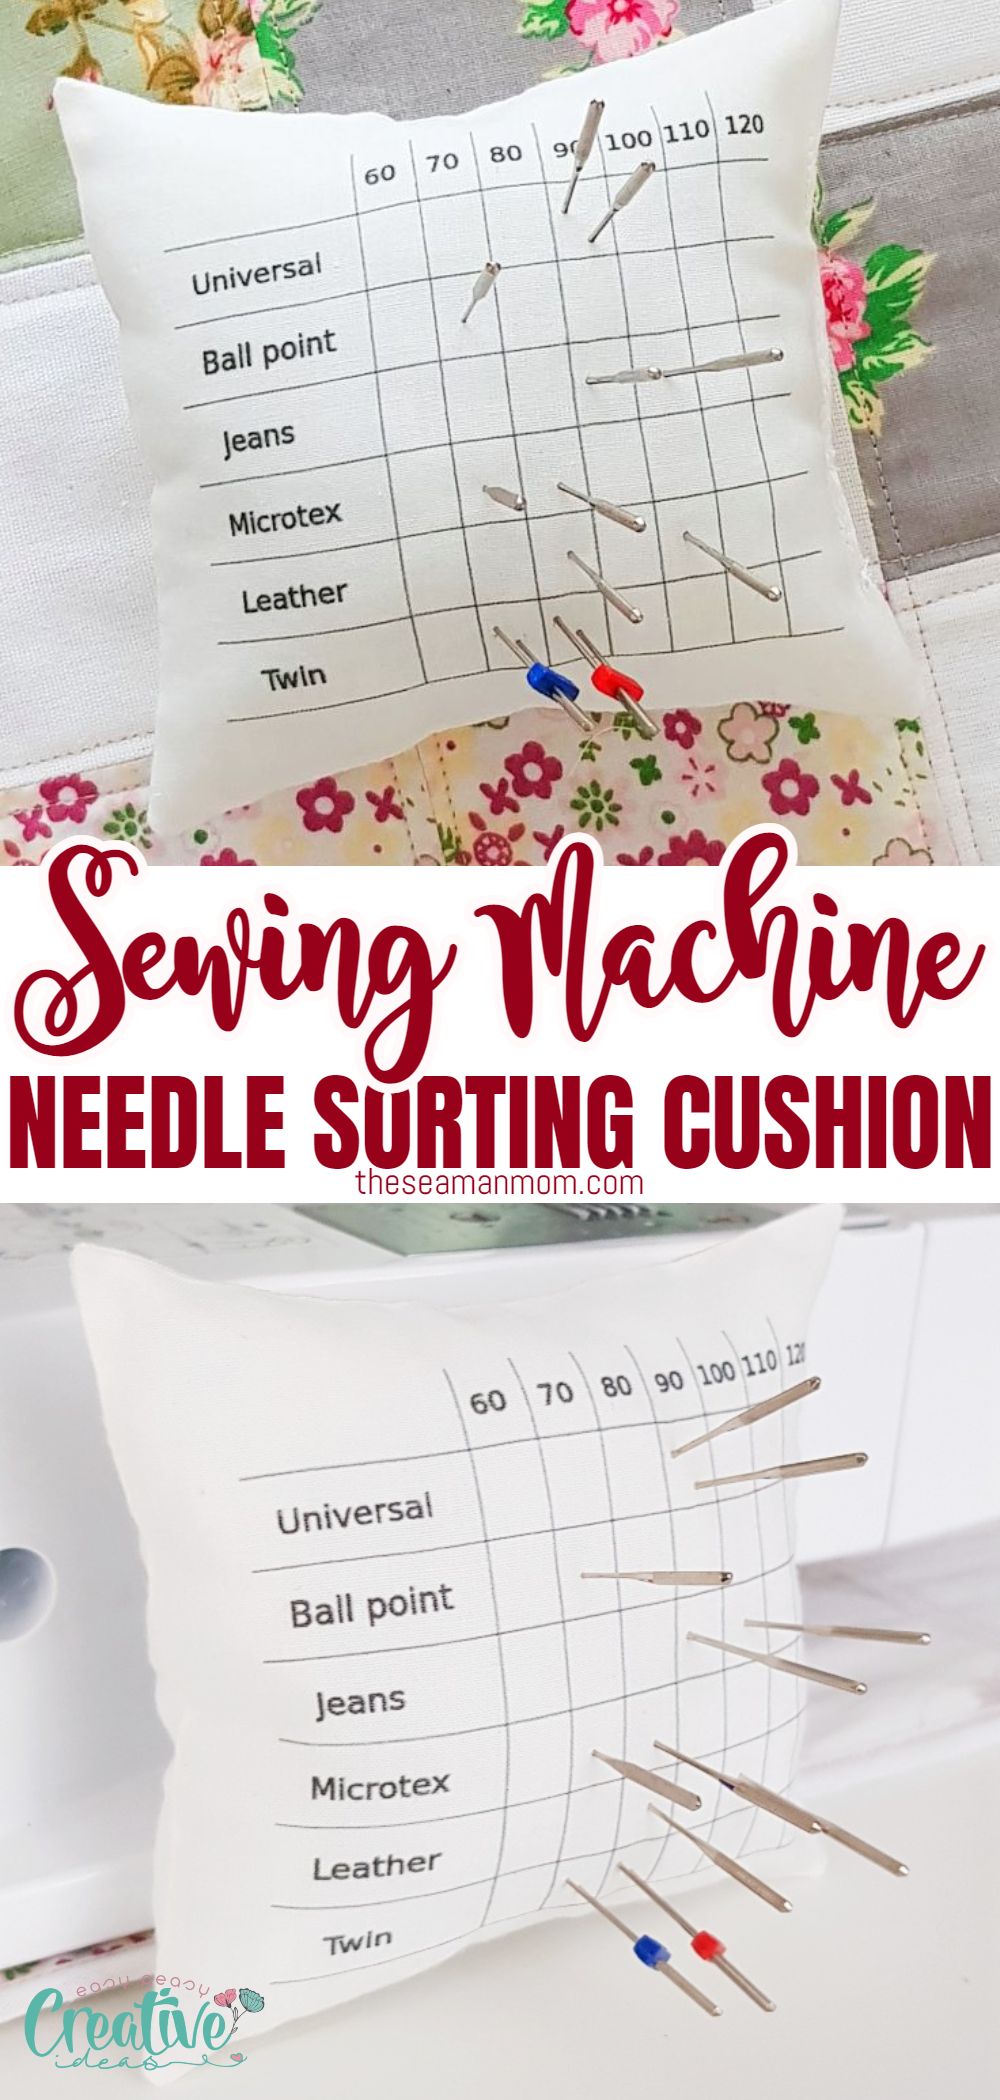 In need for some sewing needle storage ideas? Elevate the classic pincushion to new heights with a sewing needle organizer! This sewing needle holder is super fast & easy to make and helps you keep track of your sewing needles at all times! via @petroneagu